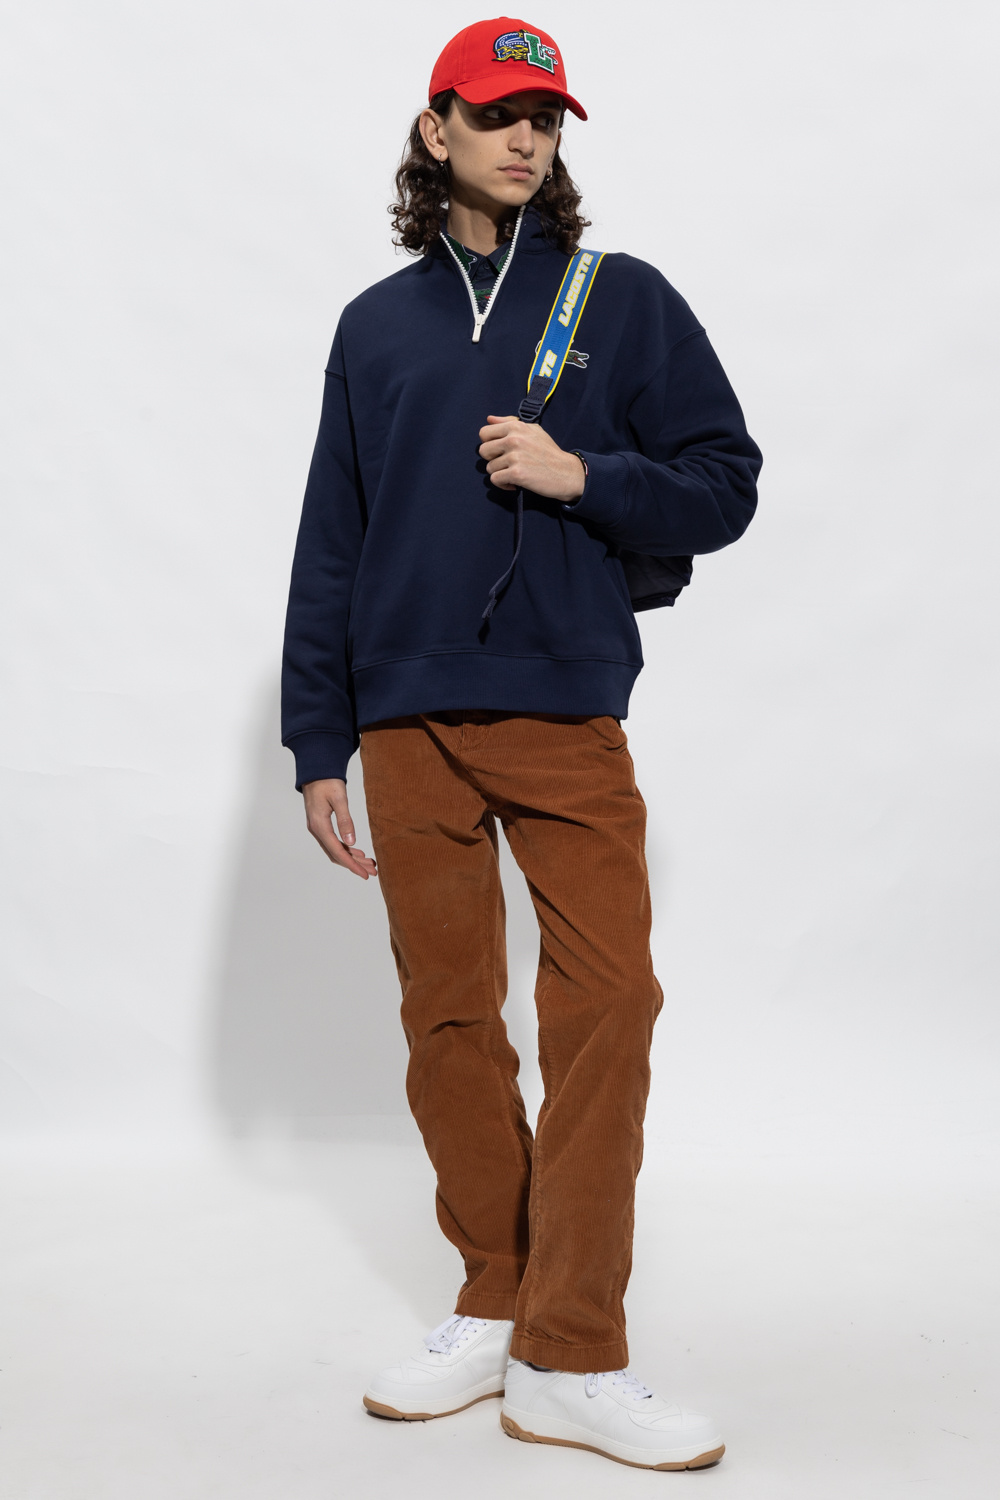 lacoste 7-41SUI0012B53 Sweatshirt with high neck